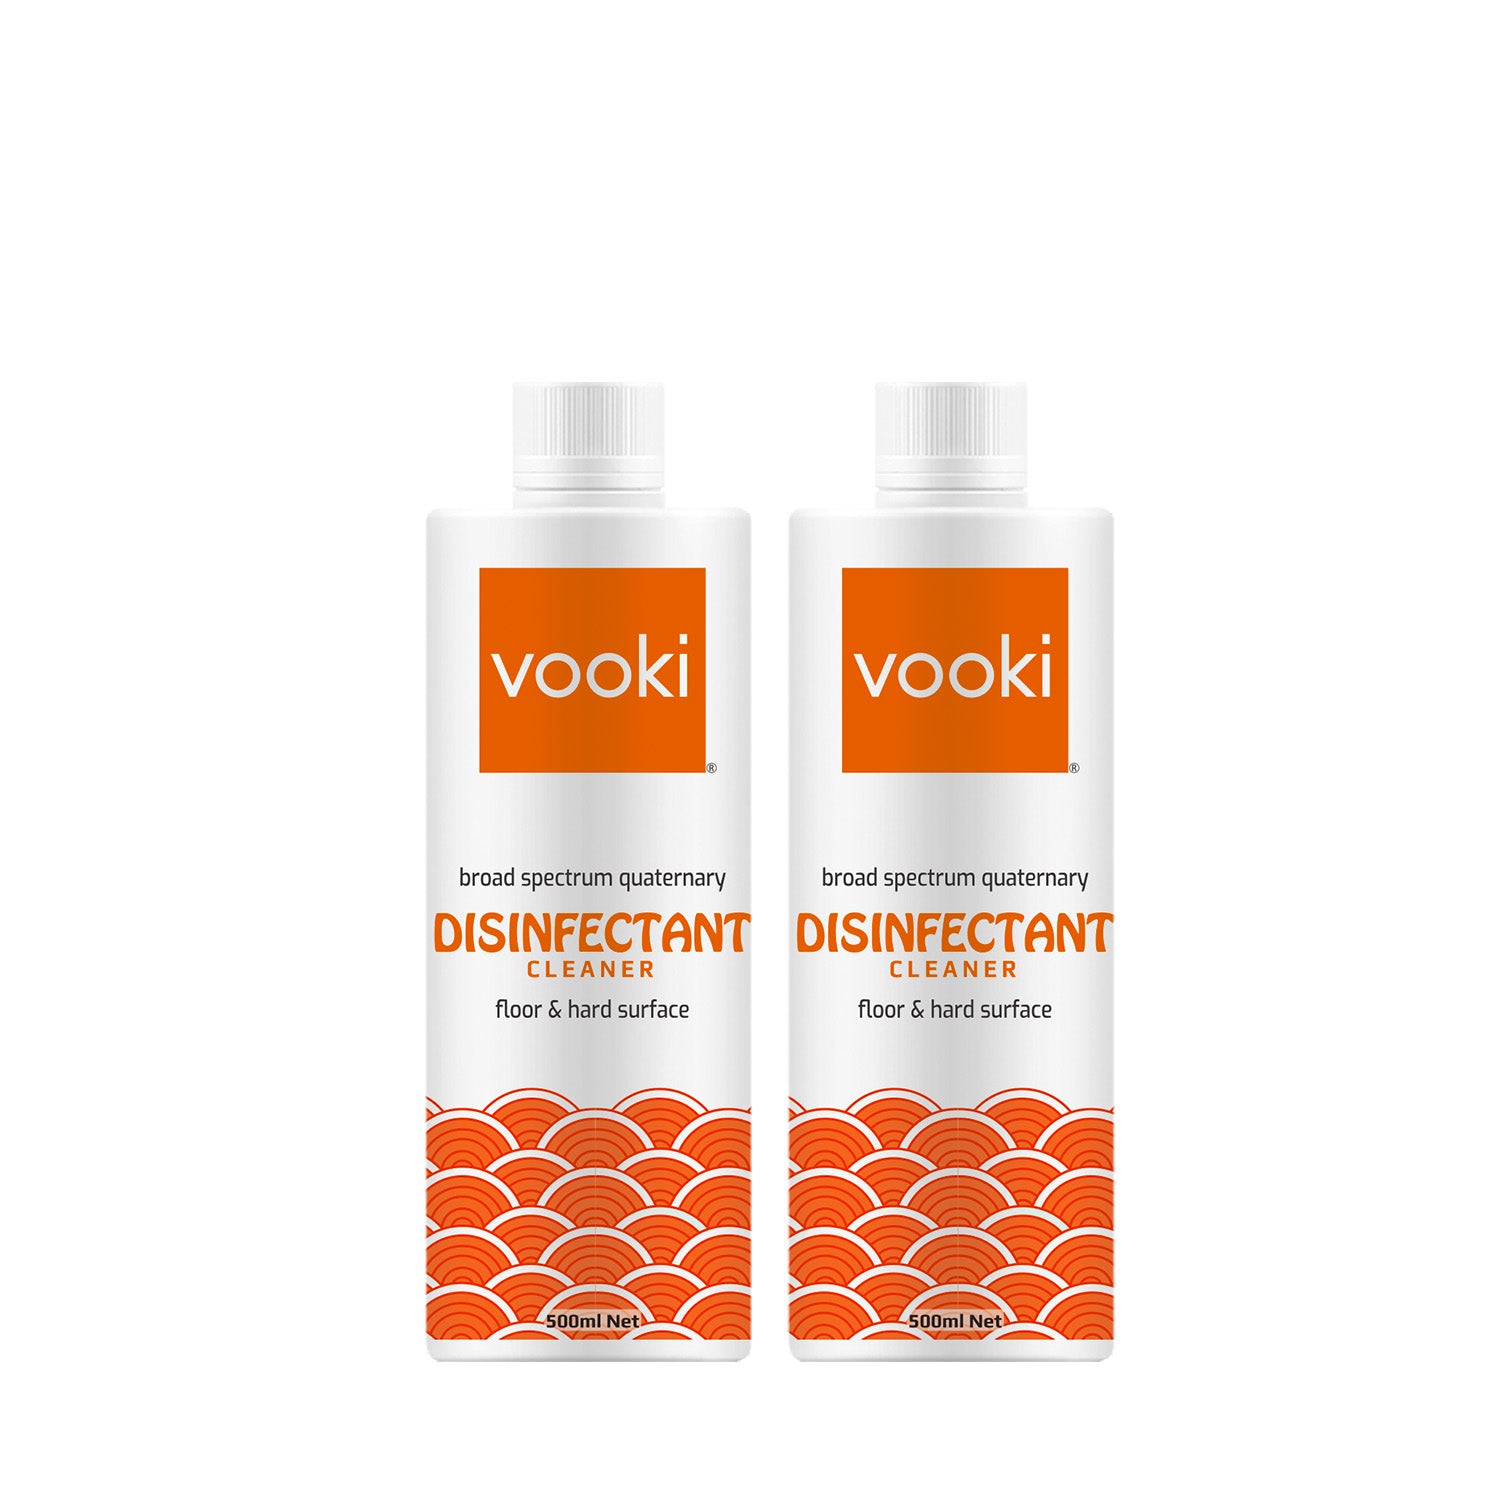 Two 500ml bottles of vooki disinfectant cleaner are displayed in the image, offering a reliable solution for sanitizing surfaces.